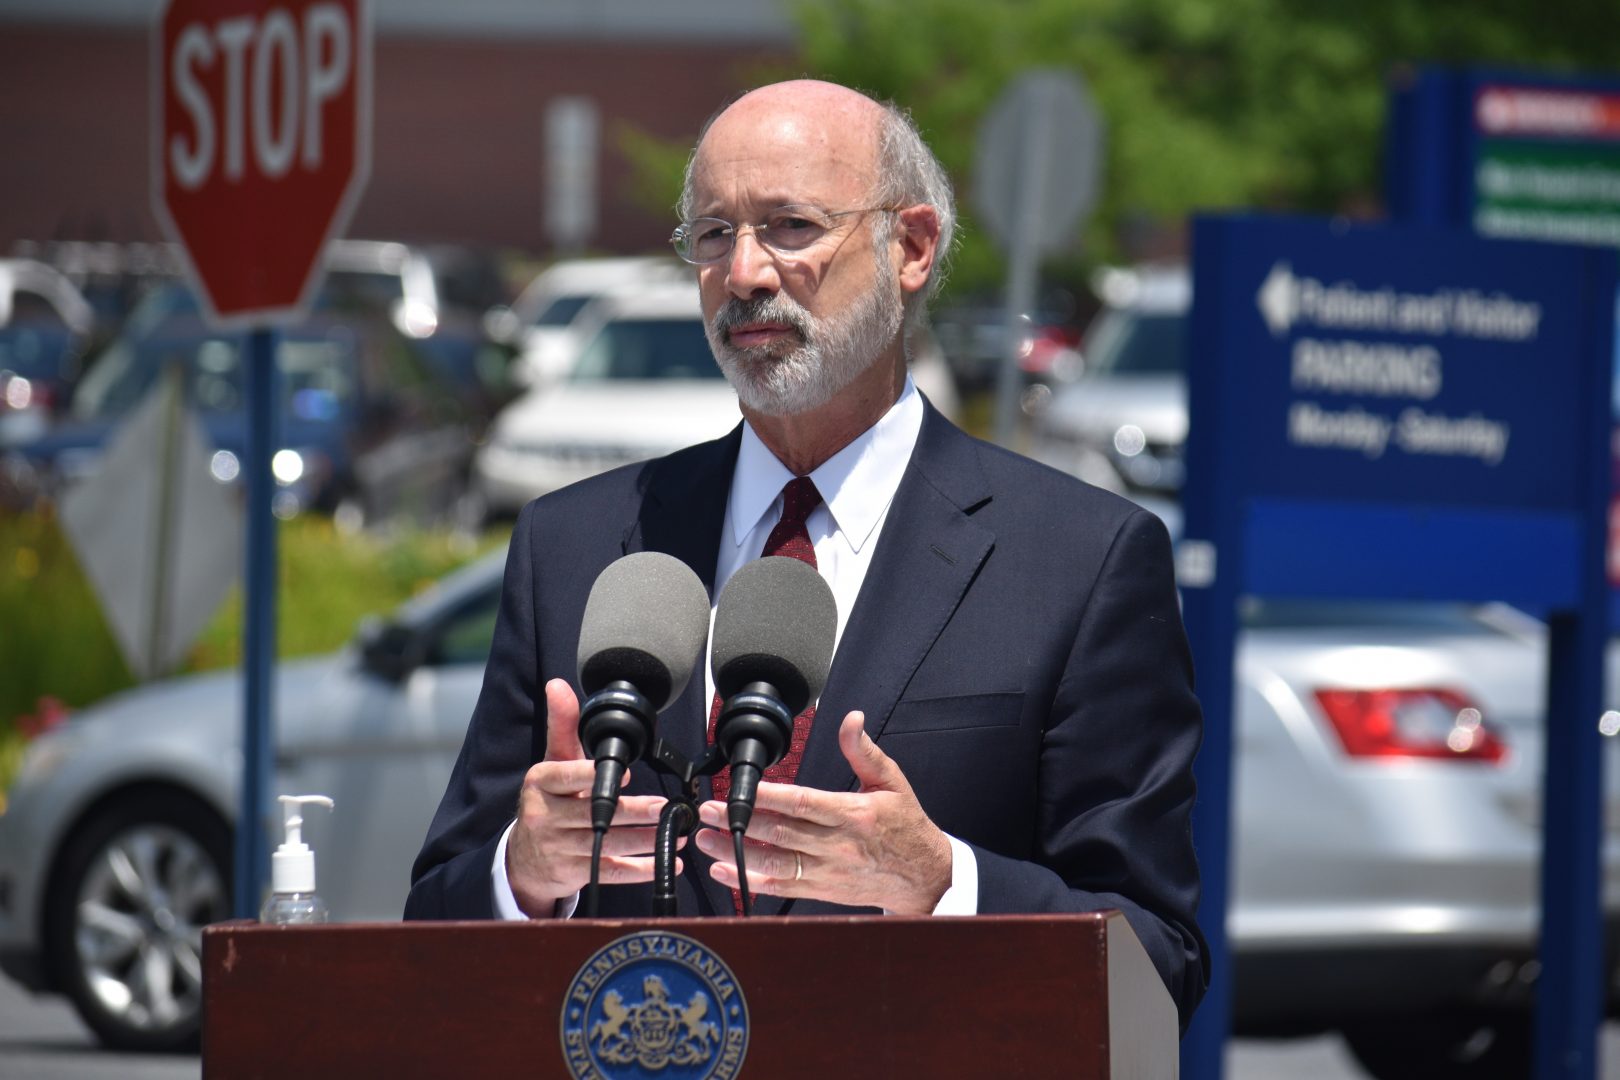 Pennsylvania Gov. Tom Wolf speaks at a news conference in Dauphin County on June 29, 2020.